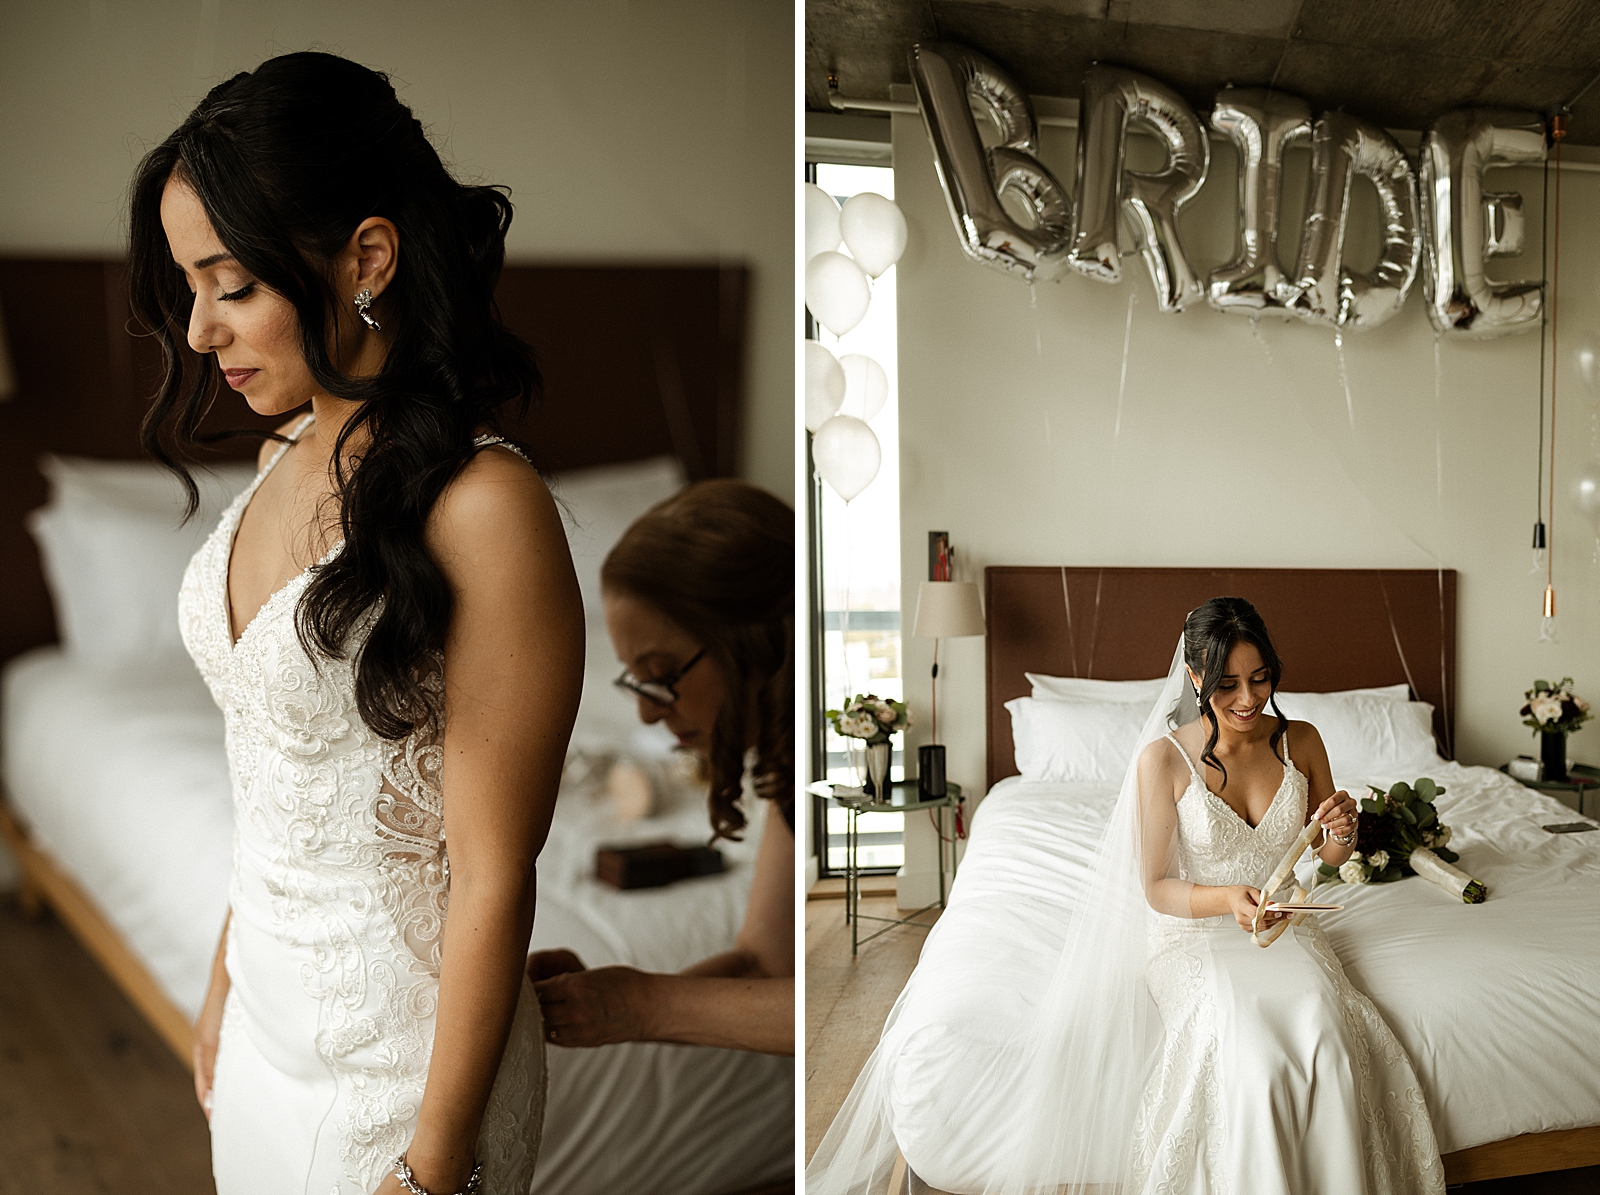 Bride getting help button up dress and sitting on bed after getting ready